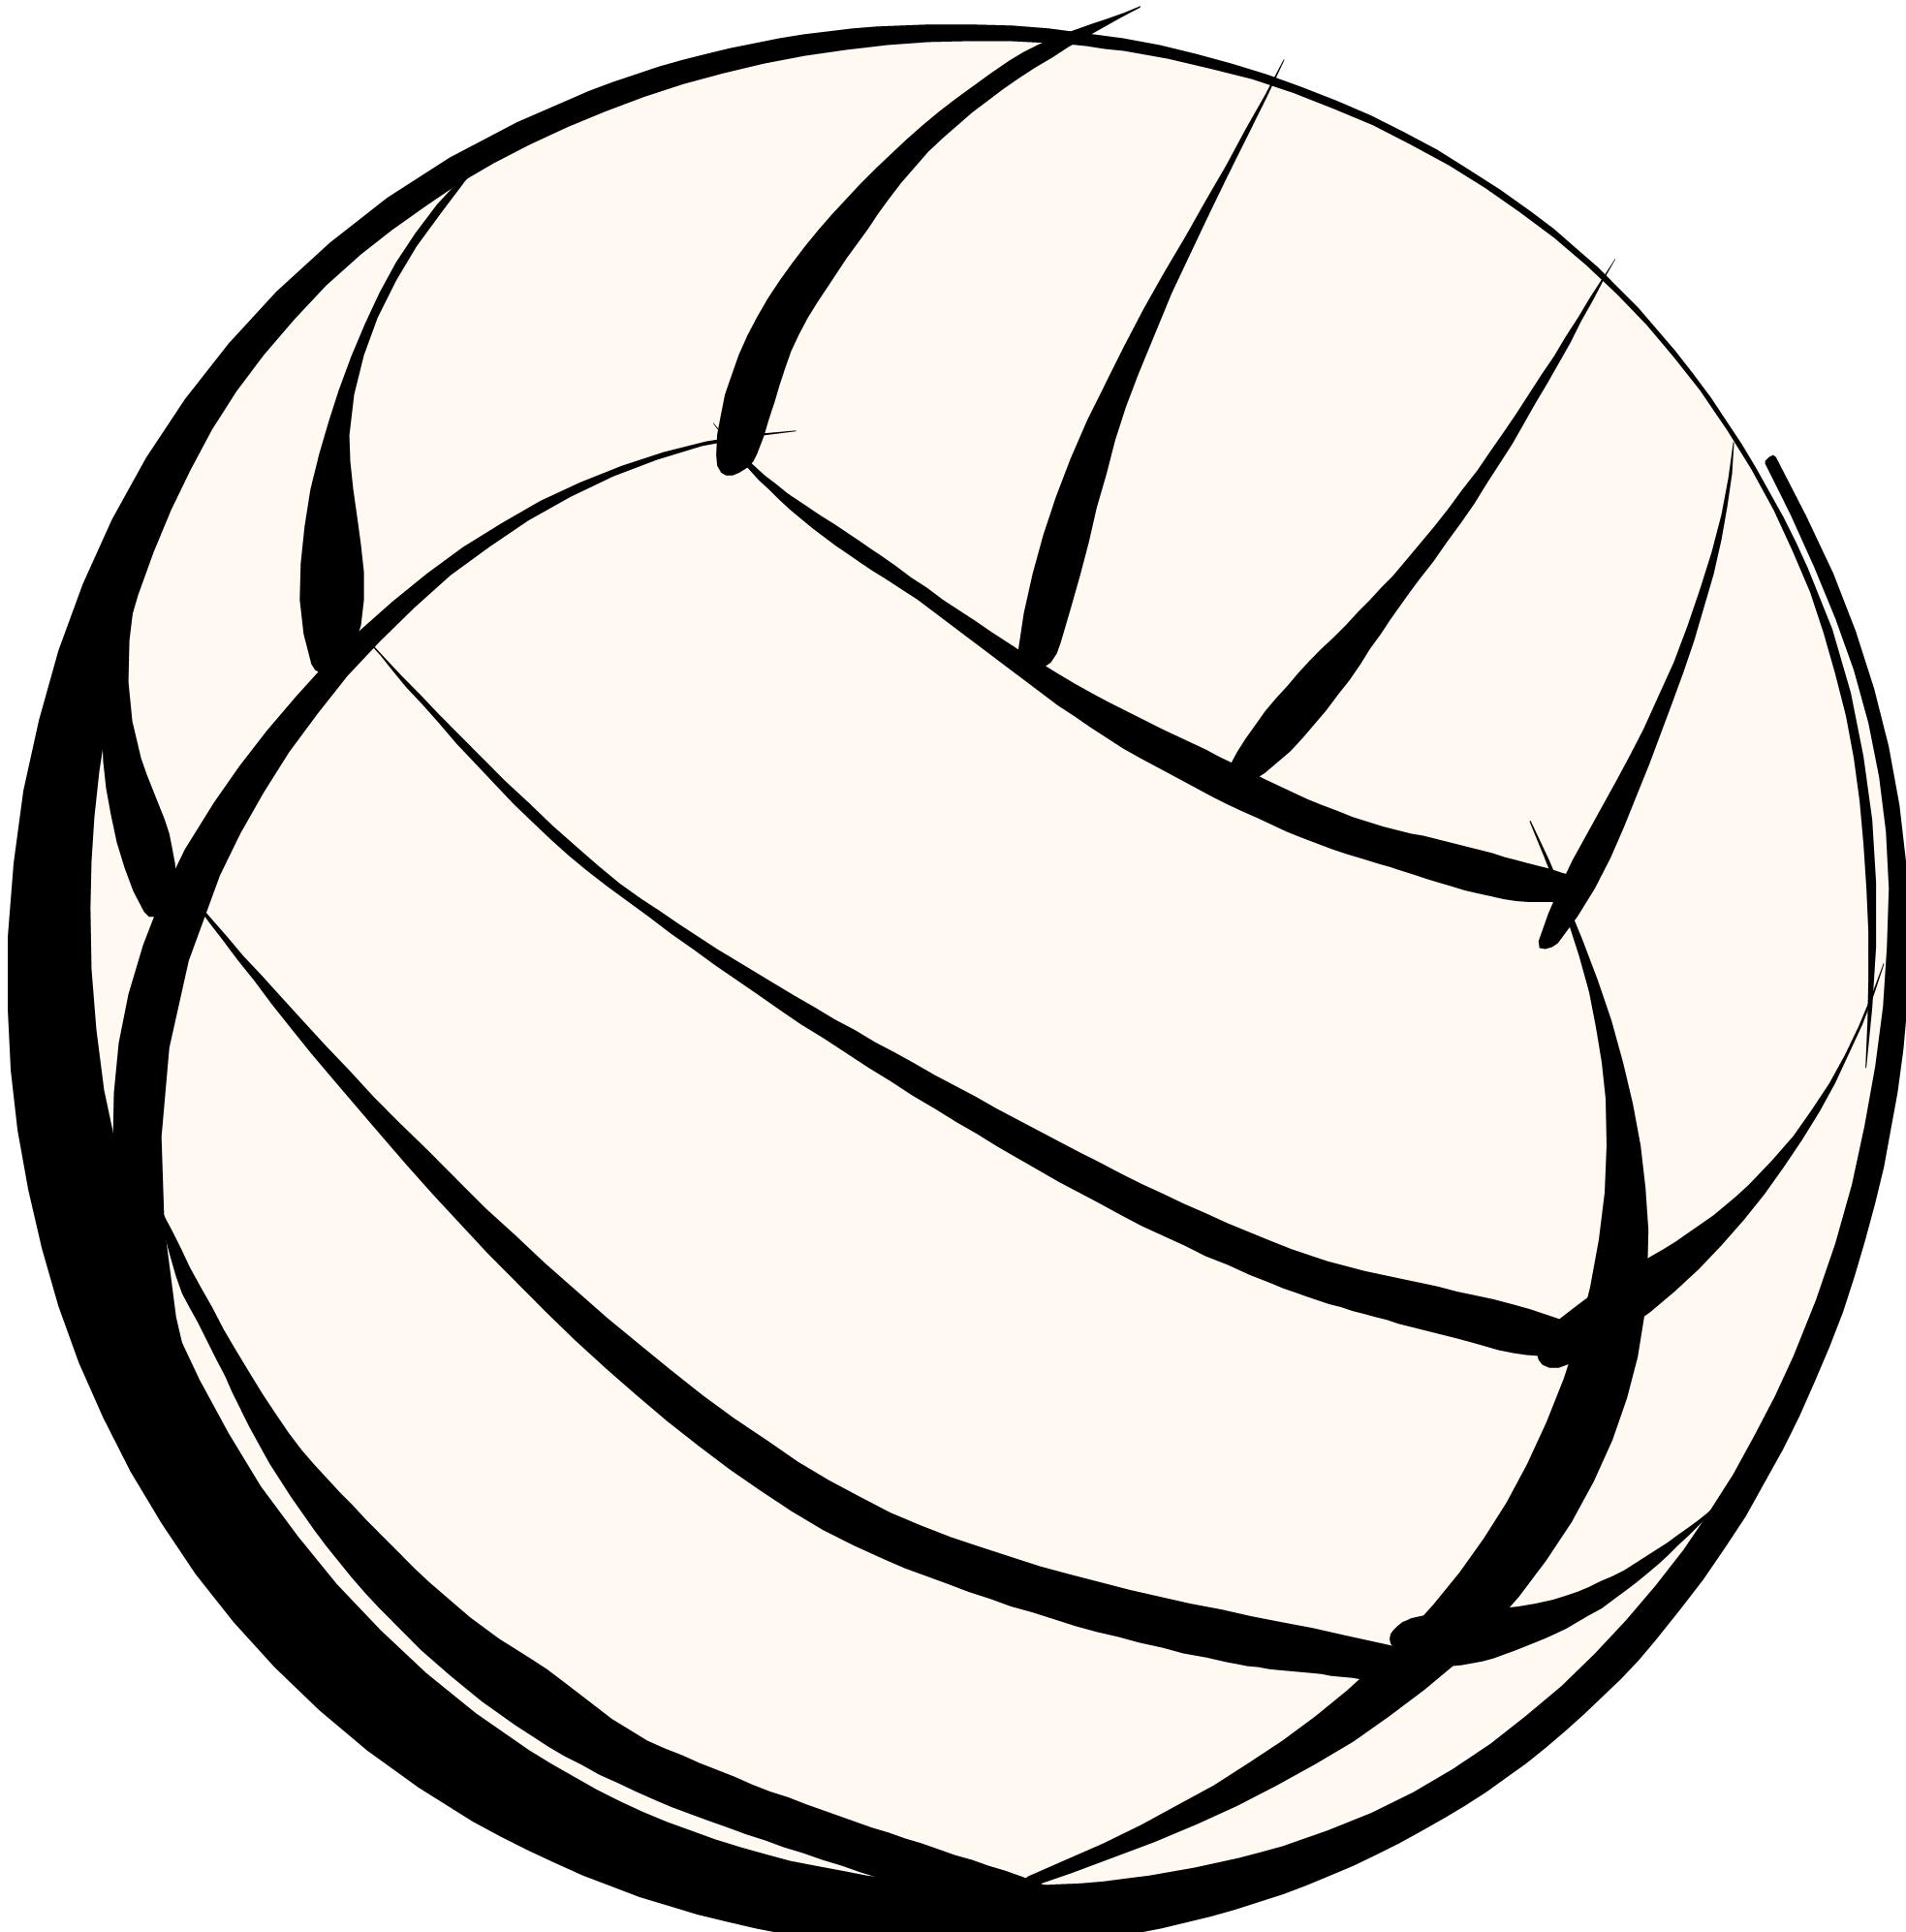 Volleyball Clipart Free Microsoft | Clipart library - Free Clipart 